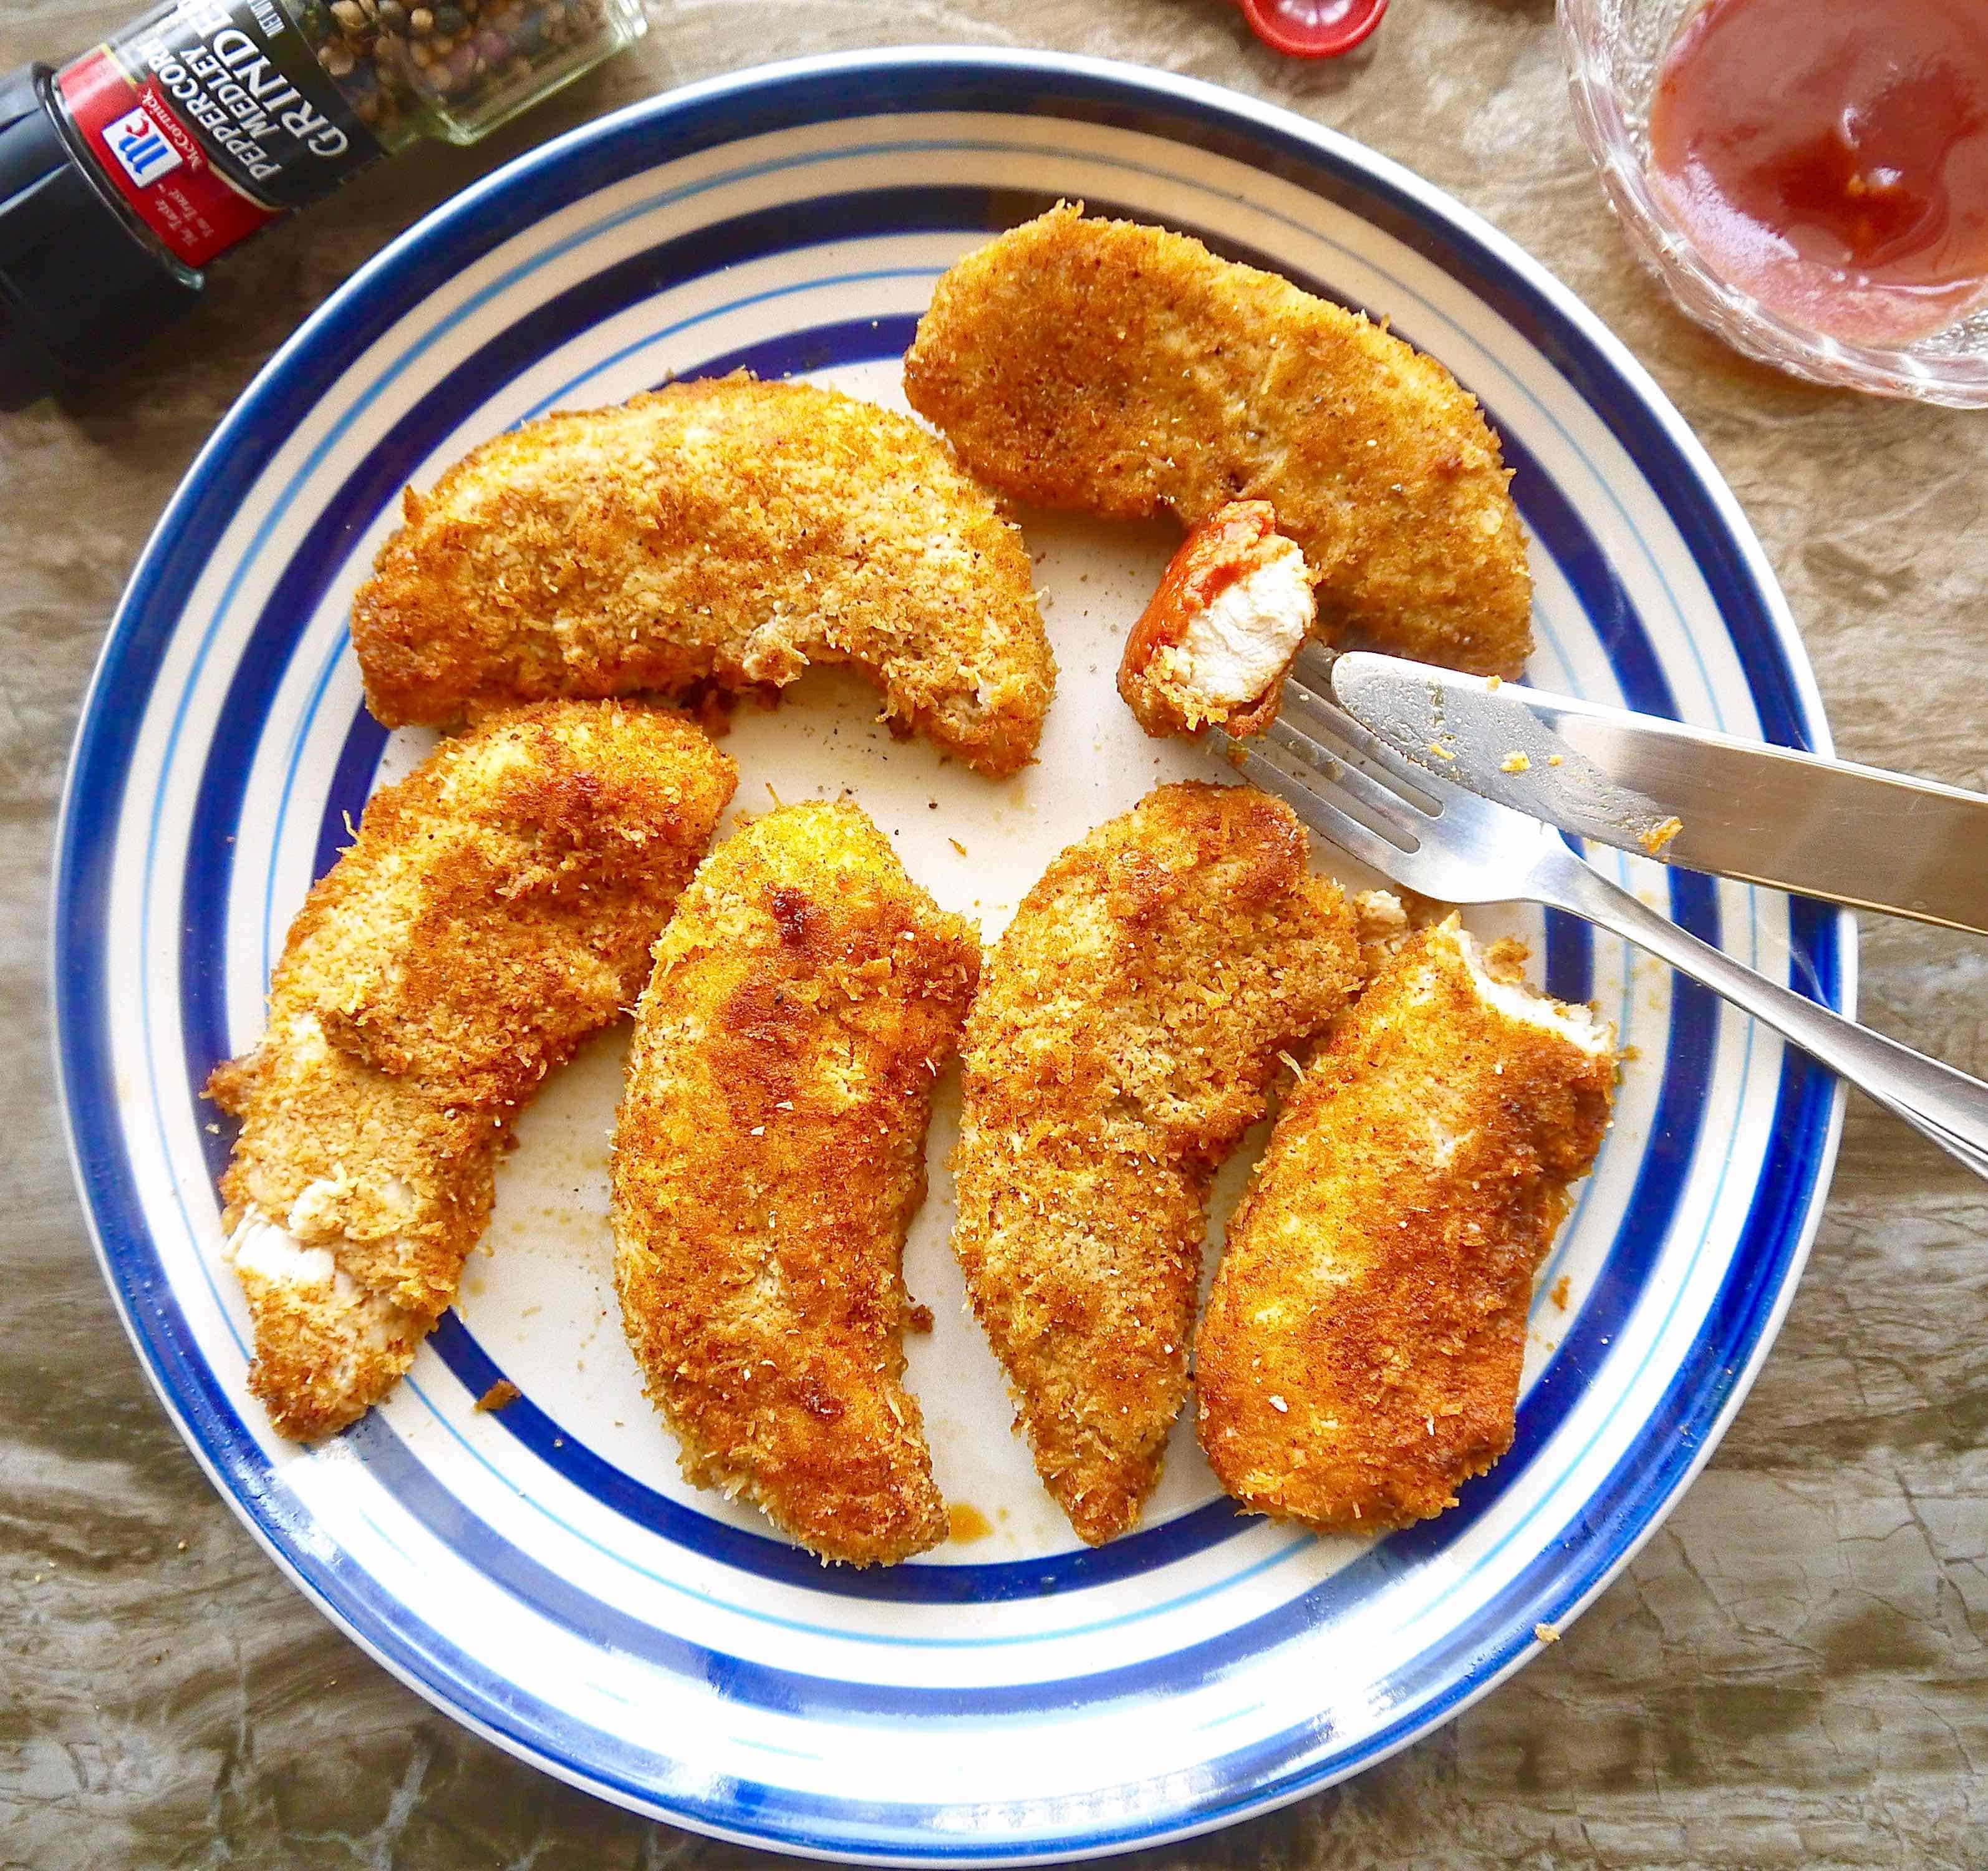 Baked Paleo Chicken Tenders with Shredded Coconut in a plate with a knife and fork.